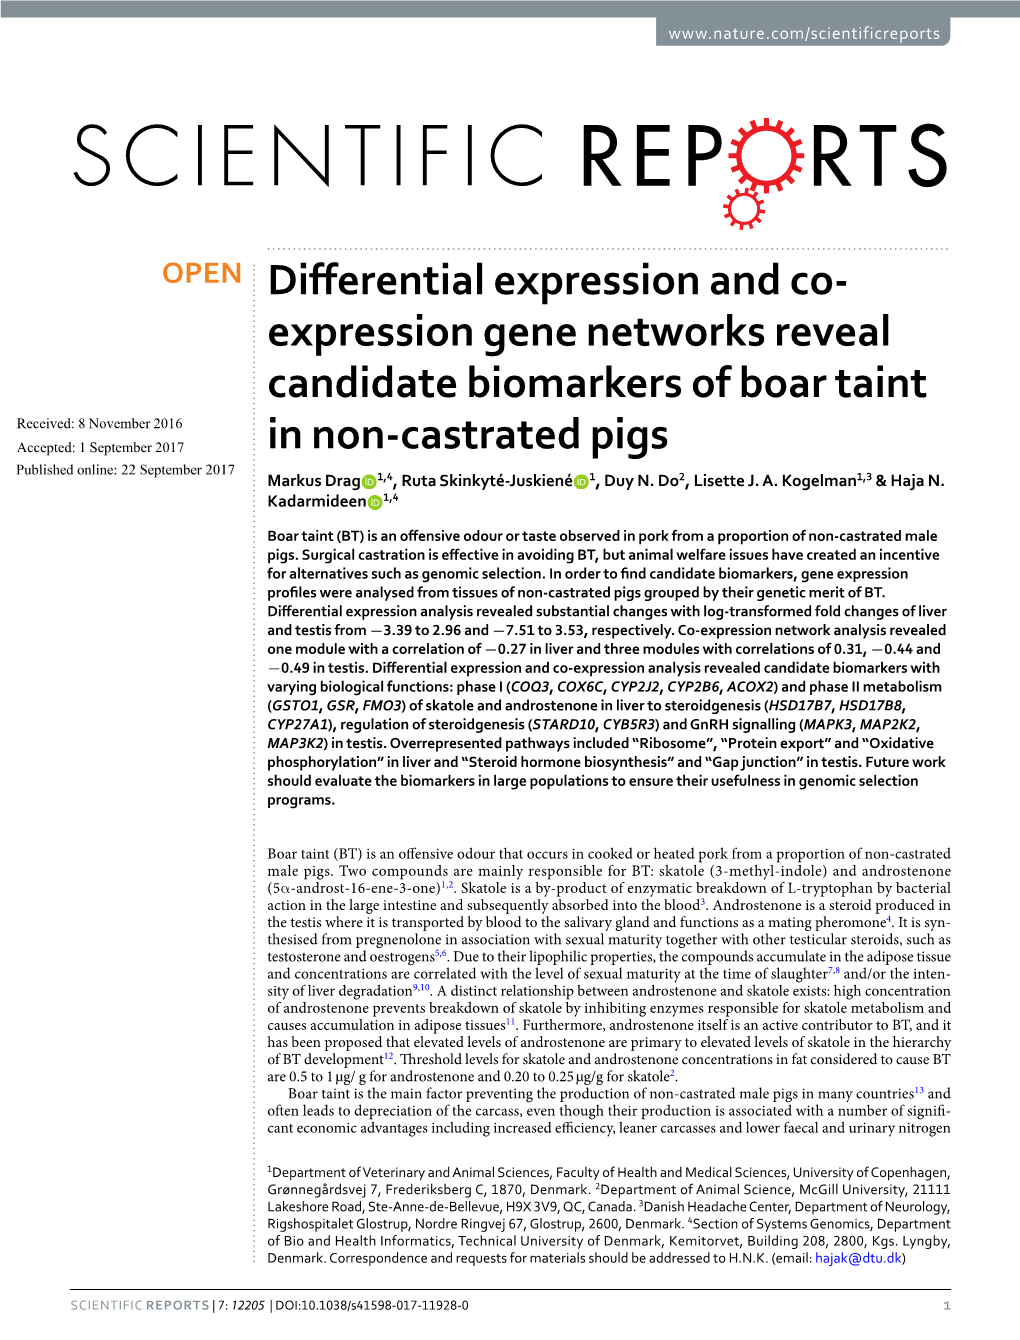 Differential Expression and Co-Expression Gene